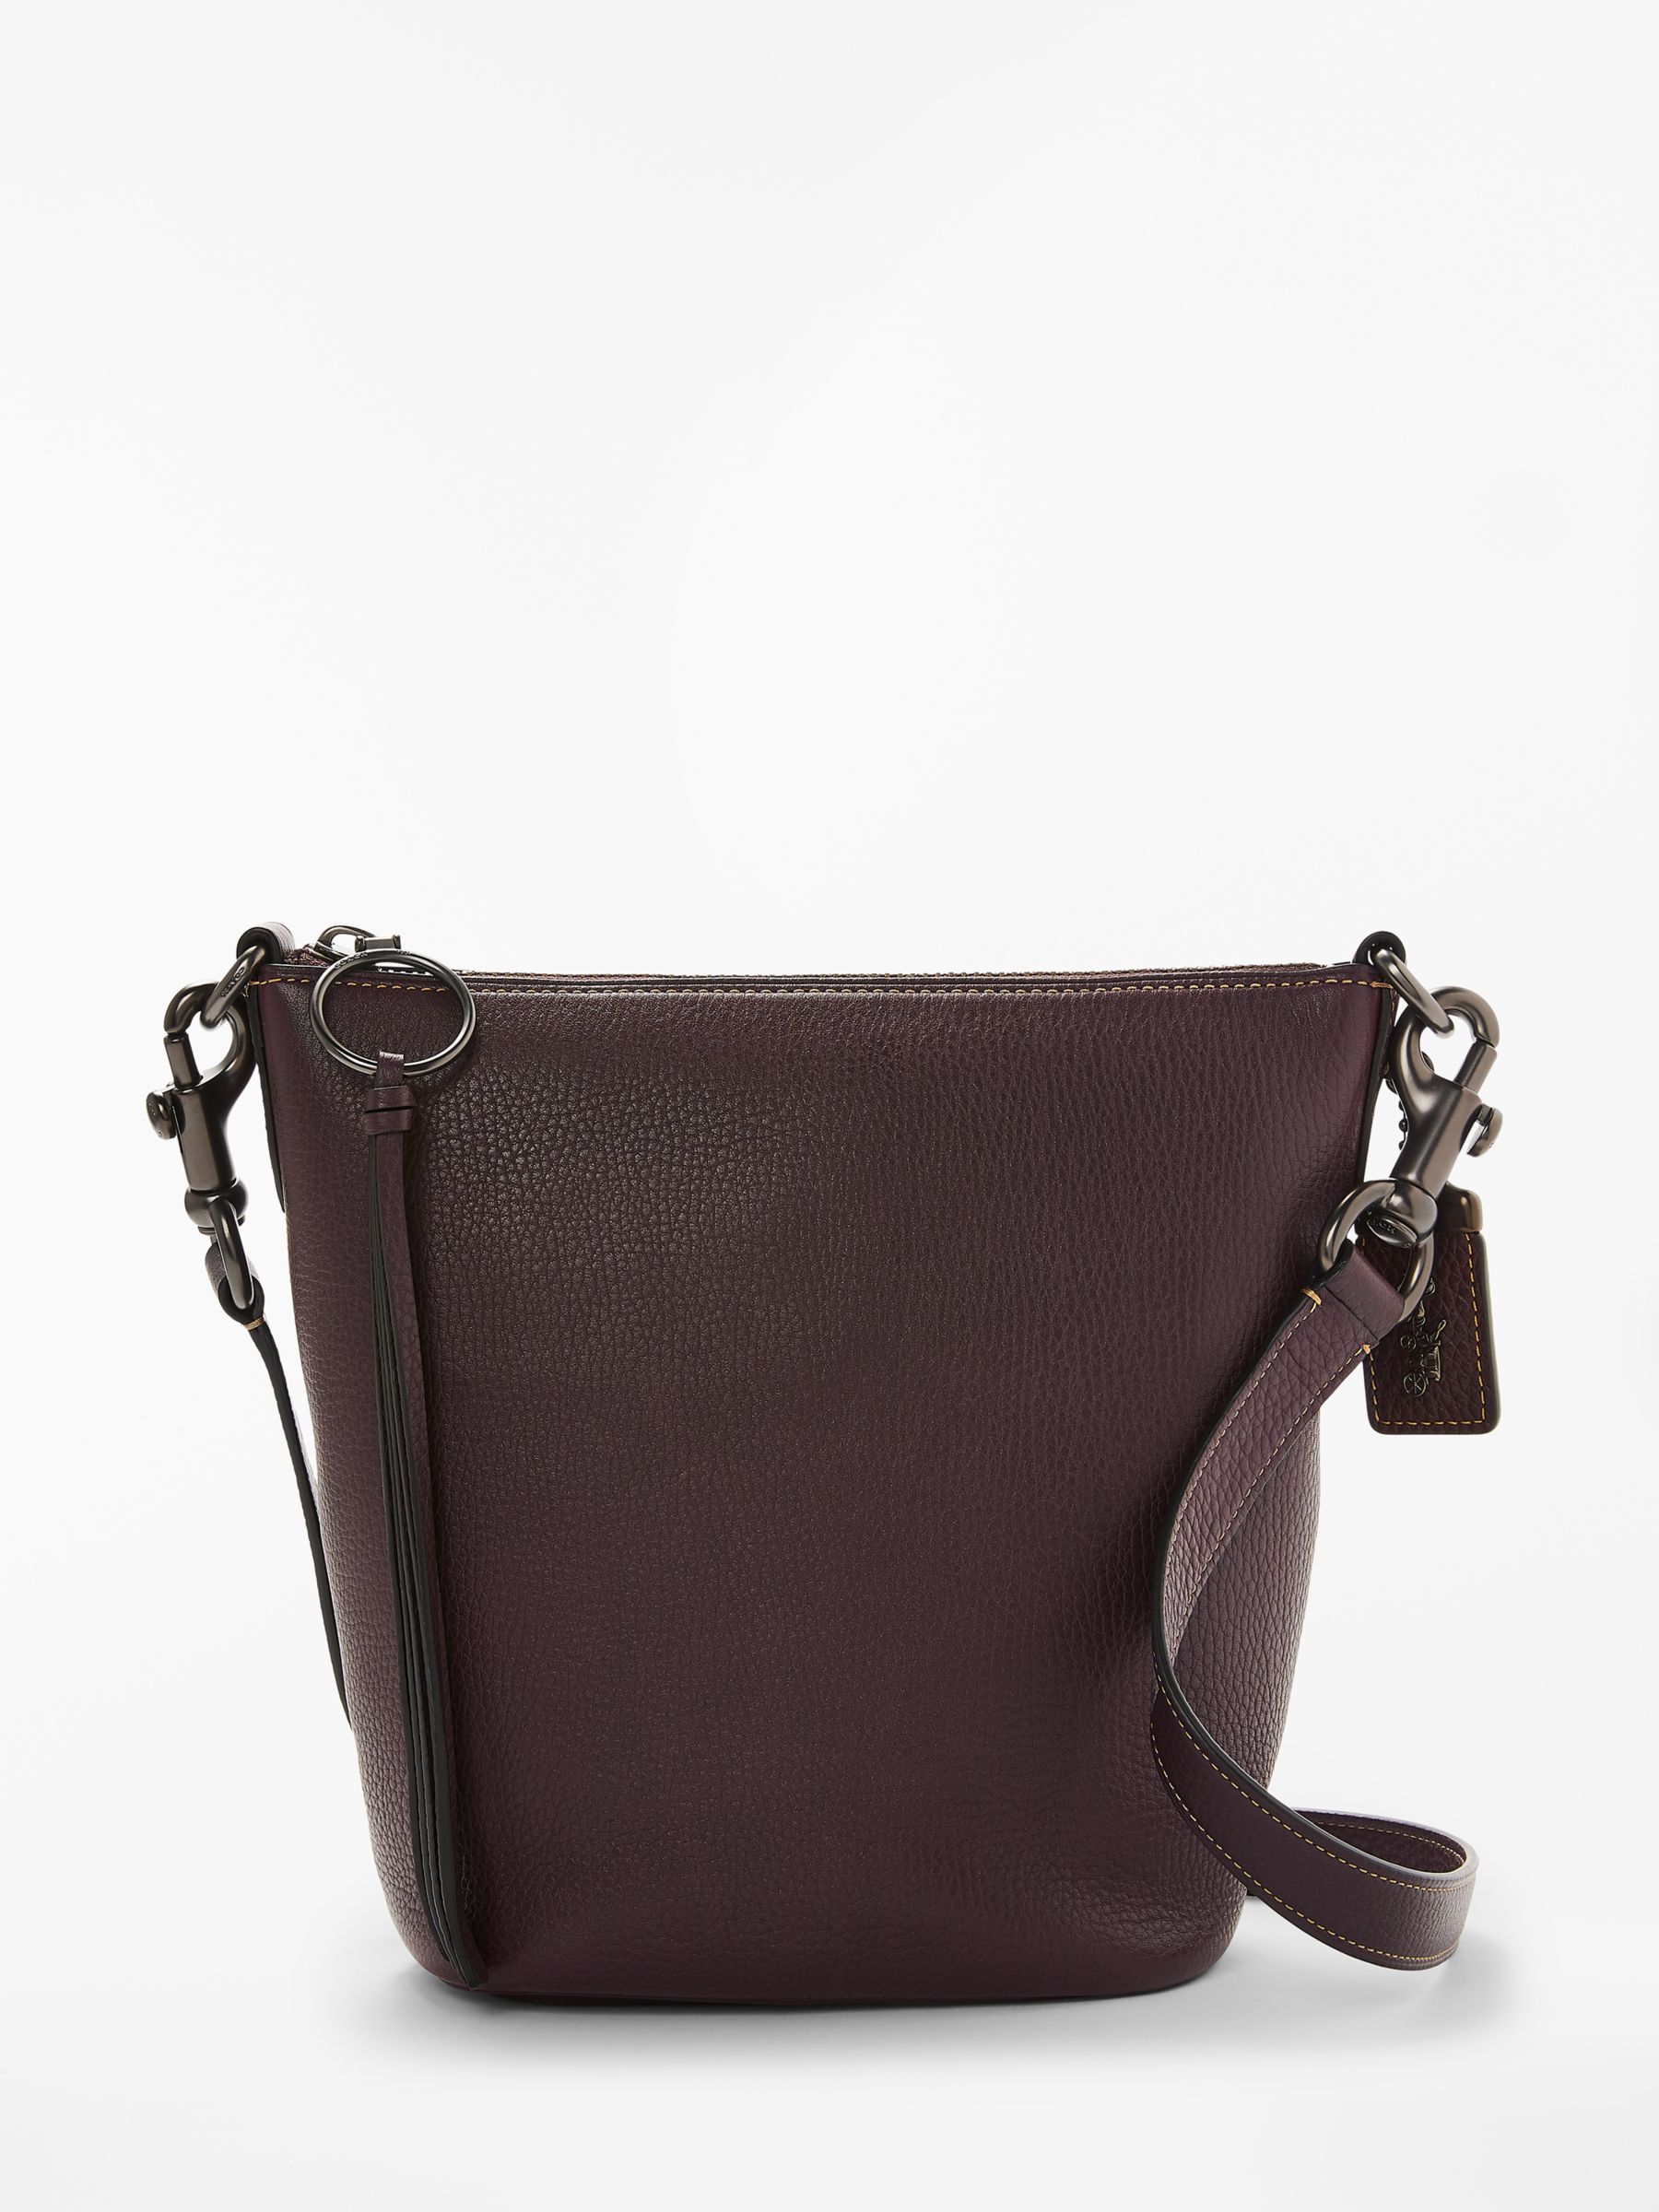 Coach Duffle 20 Leather Cross Body Bag, Oxblood at John Lewis & Partners